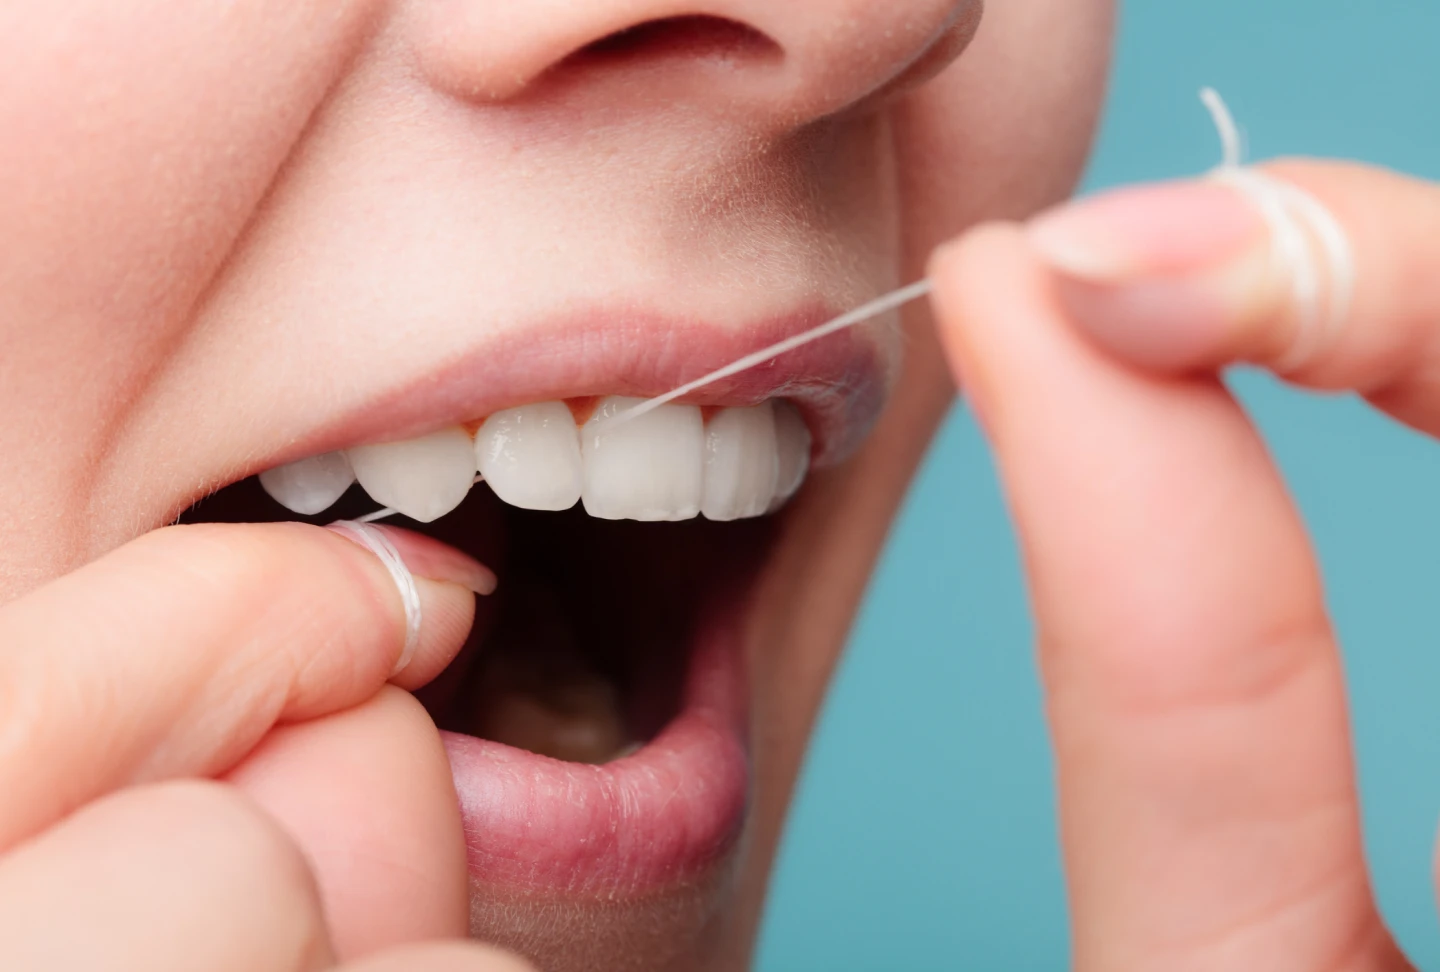 Improve dental hygiene with proper flossing techniques and learn the advantages of using a dental floss.